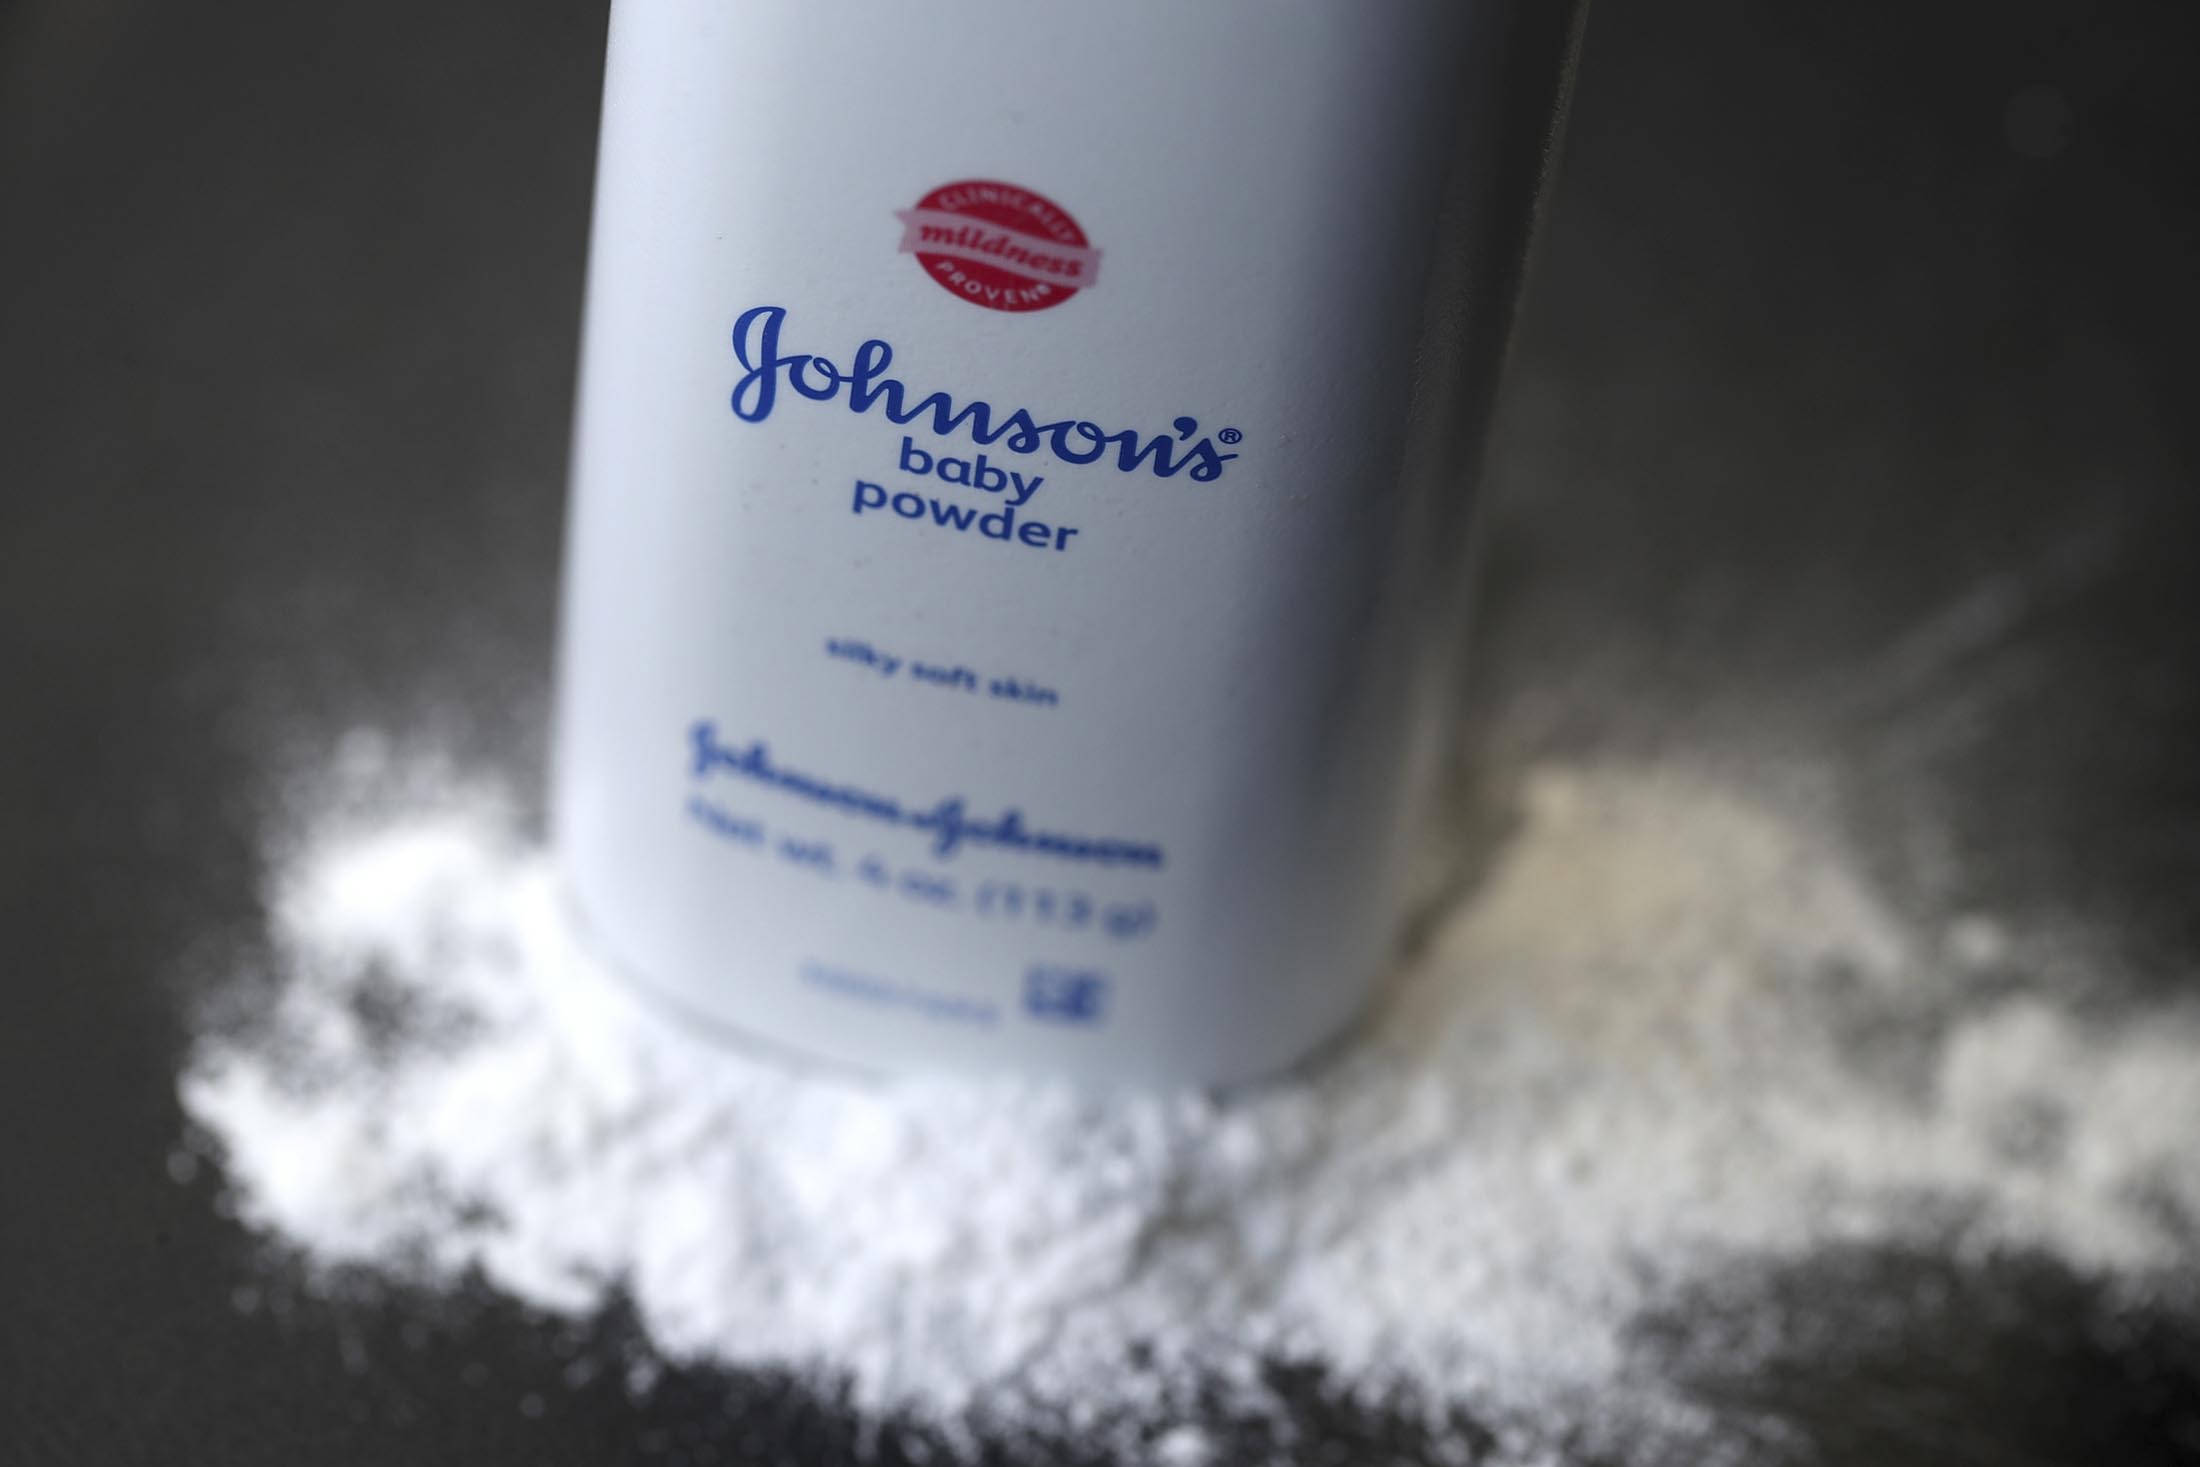 A container of Johnson’s baby powder sits on a table in San Francisco.